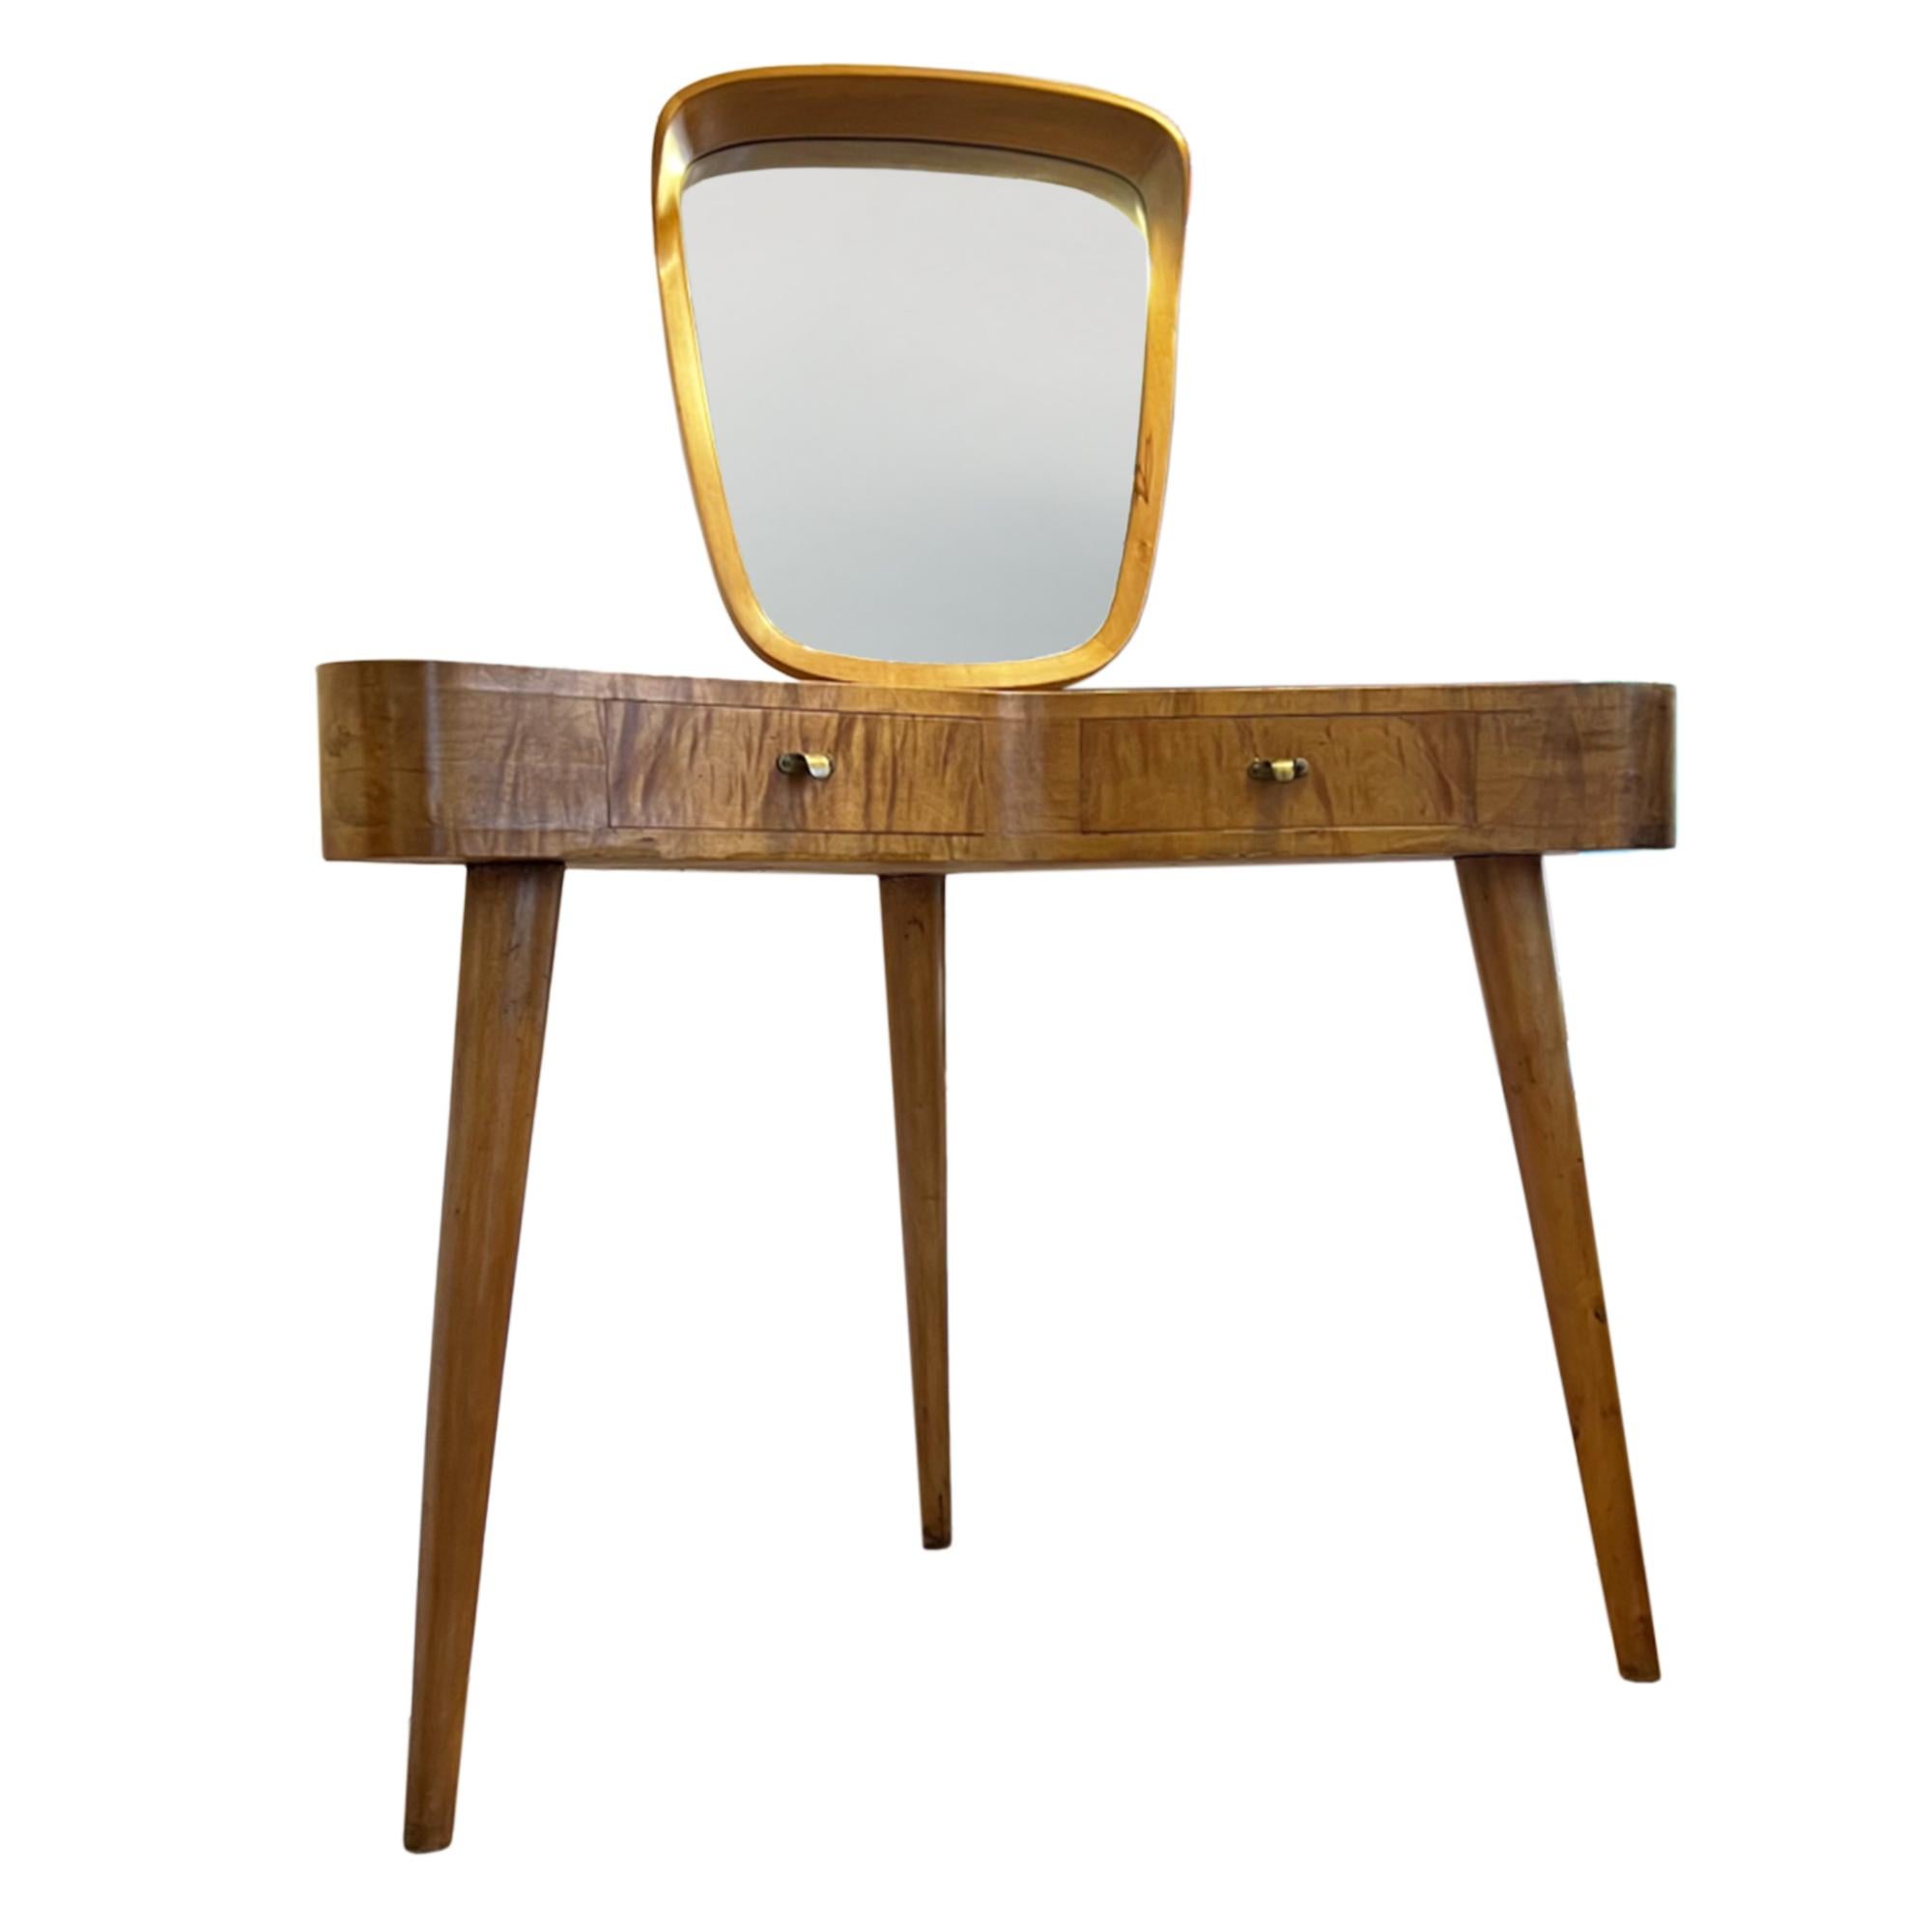 Hand-Crafted Italian Midcentury Cherrywood Dressing Table